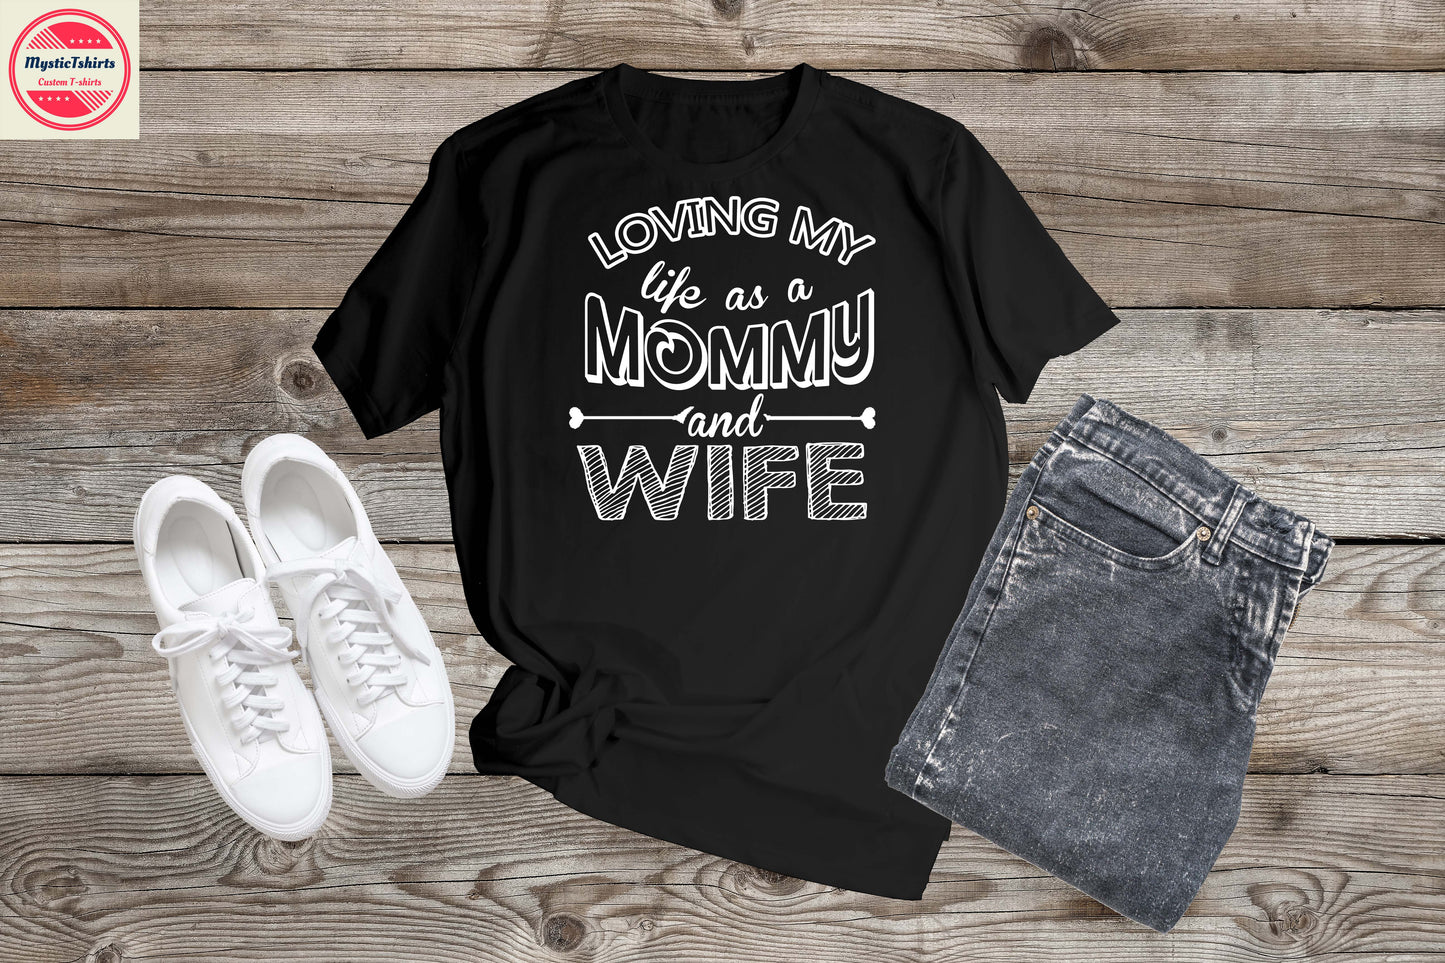 314. LOVING MY LIFE AS A MOMMY AND WIFE, Custom Made Shirt, Personalized T-Shirt, Custom Text, Make Your Own Shirt, Custom Tee